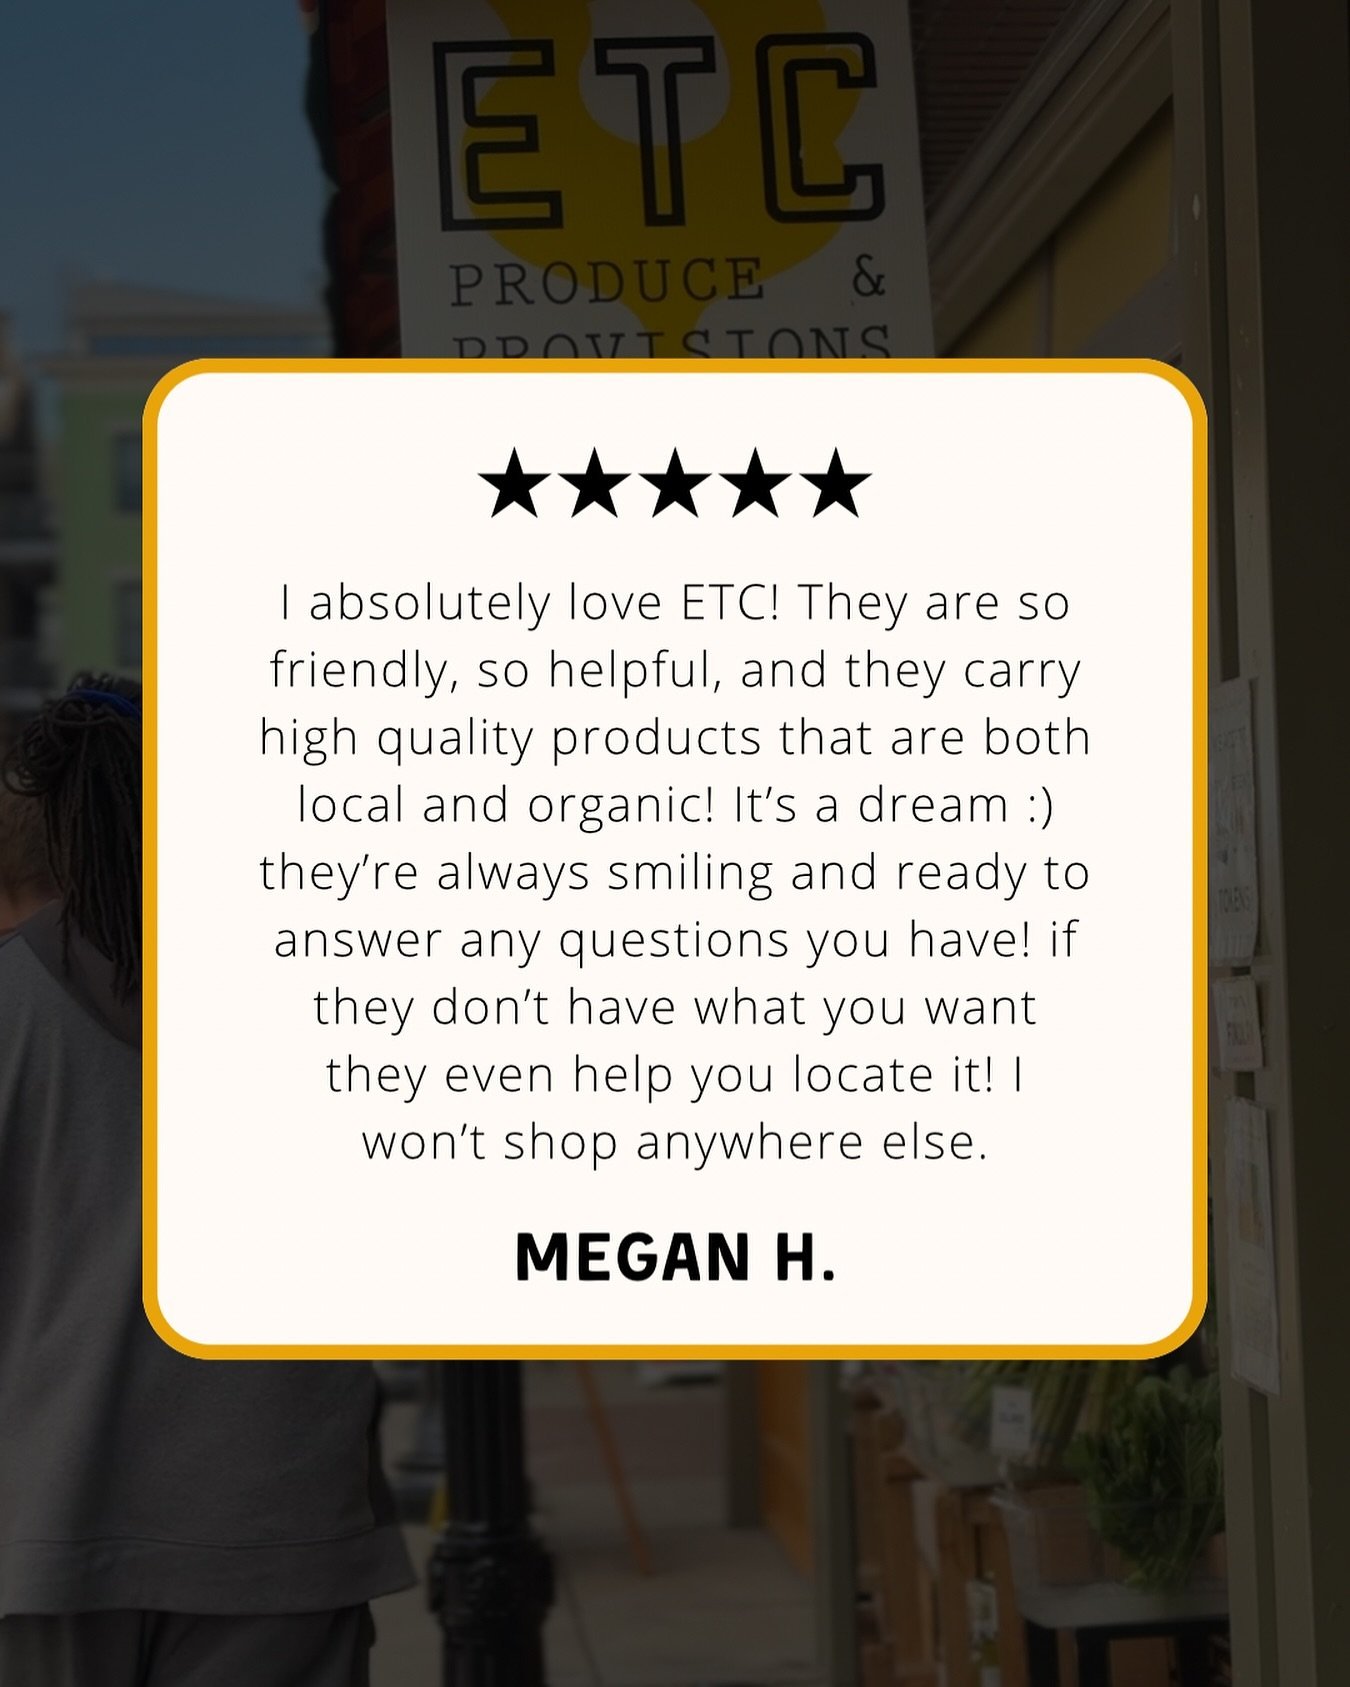 Thank you, Megan! We&rsquo;re blushing🤩
Had a great visit? We&rsquo;d love to hear about it on Google!

#5star #supportsmallbusiness #findlaymarket #otr #cincinnati #cincinnatismallbusiness #fresh #local #organic #review